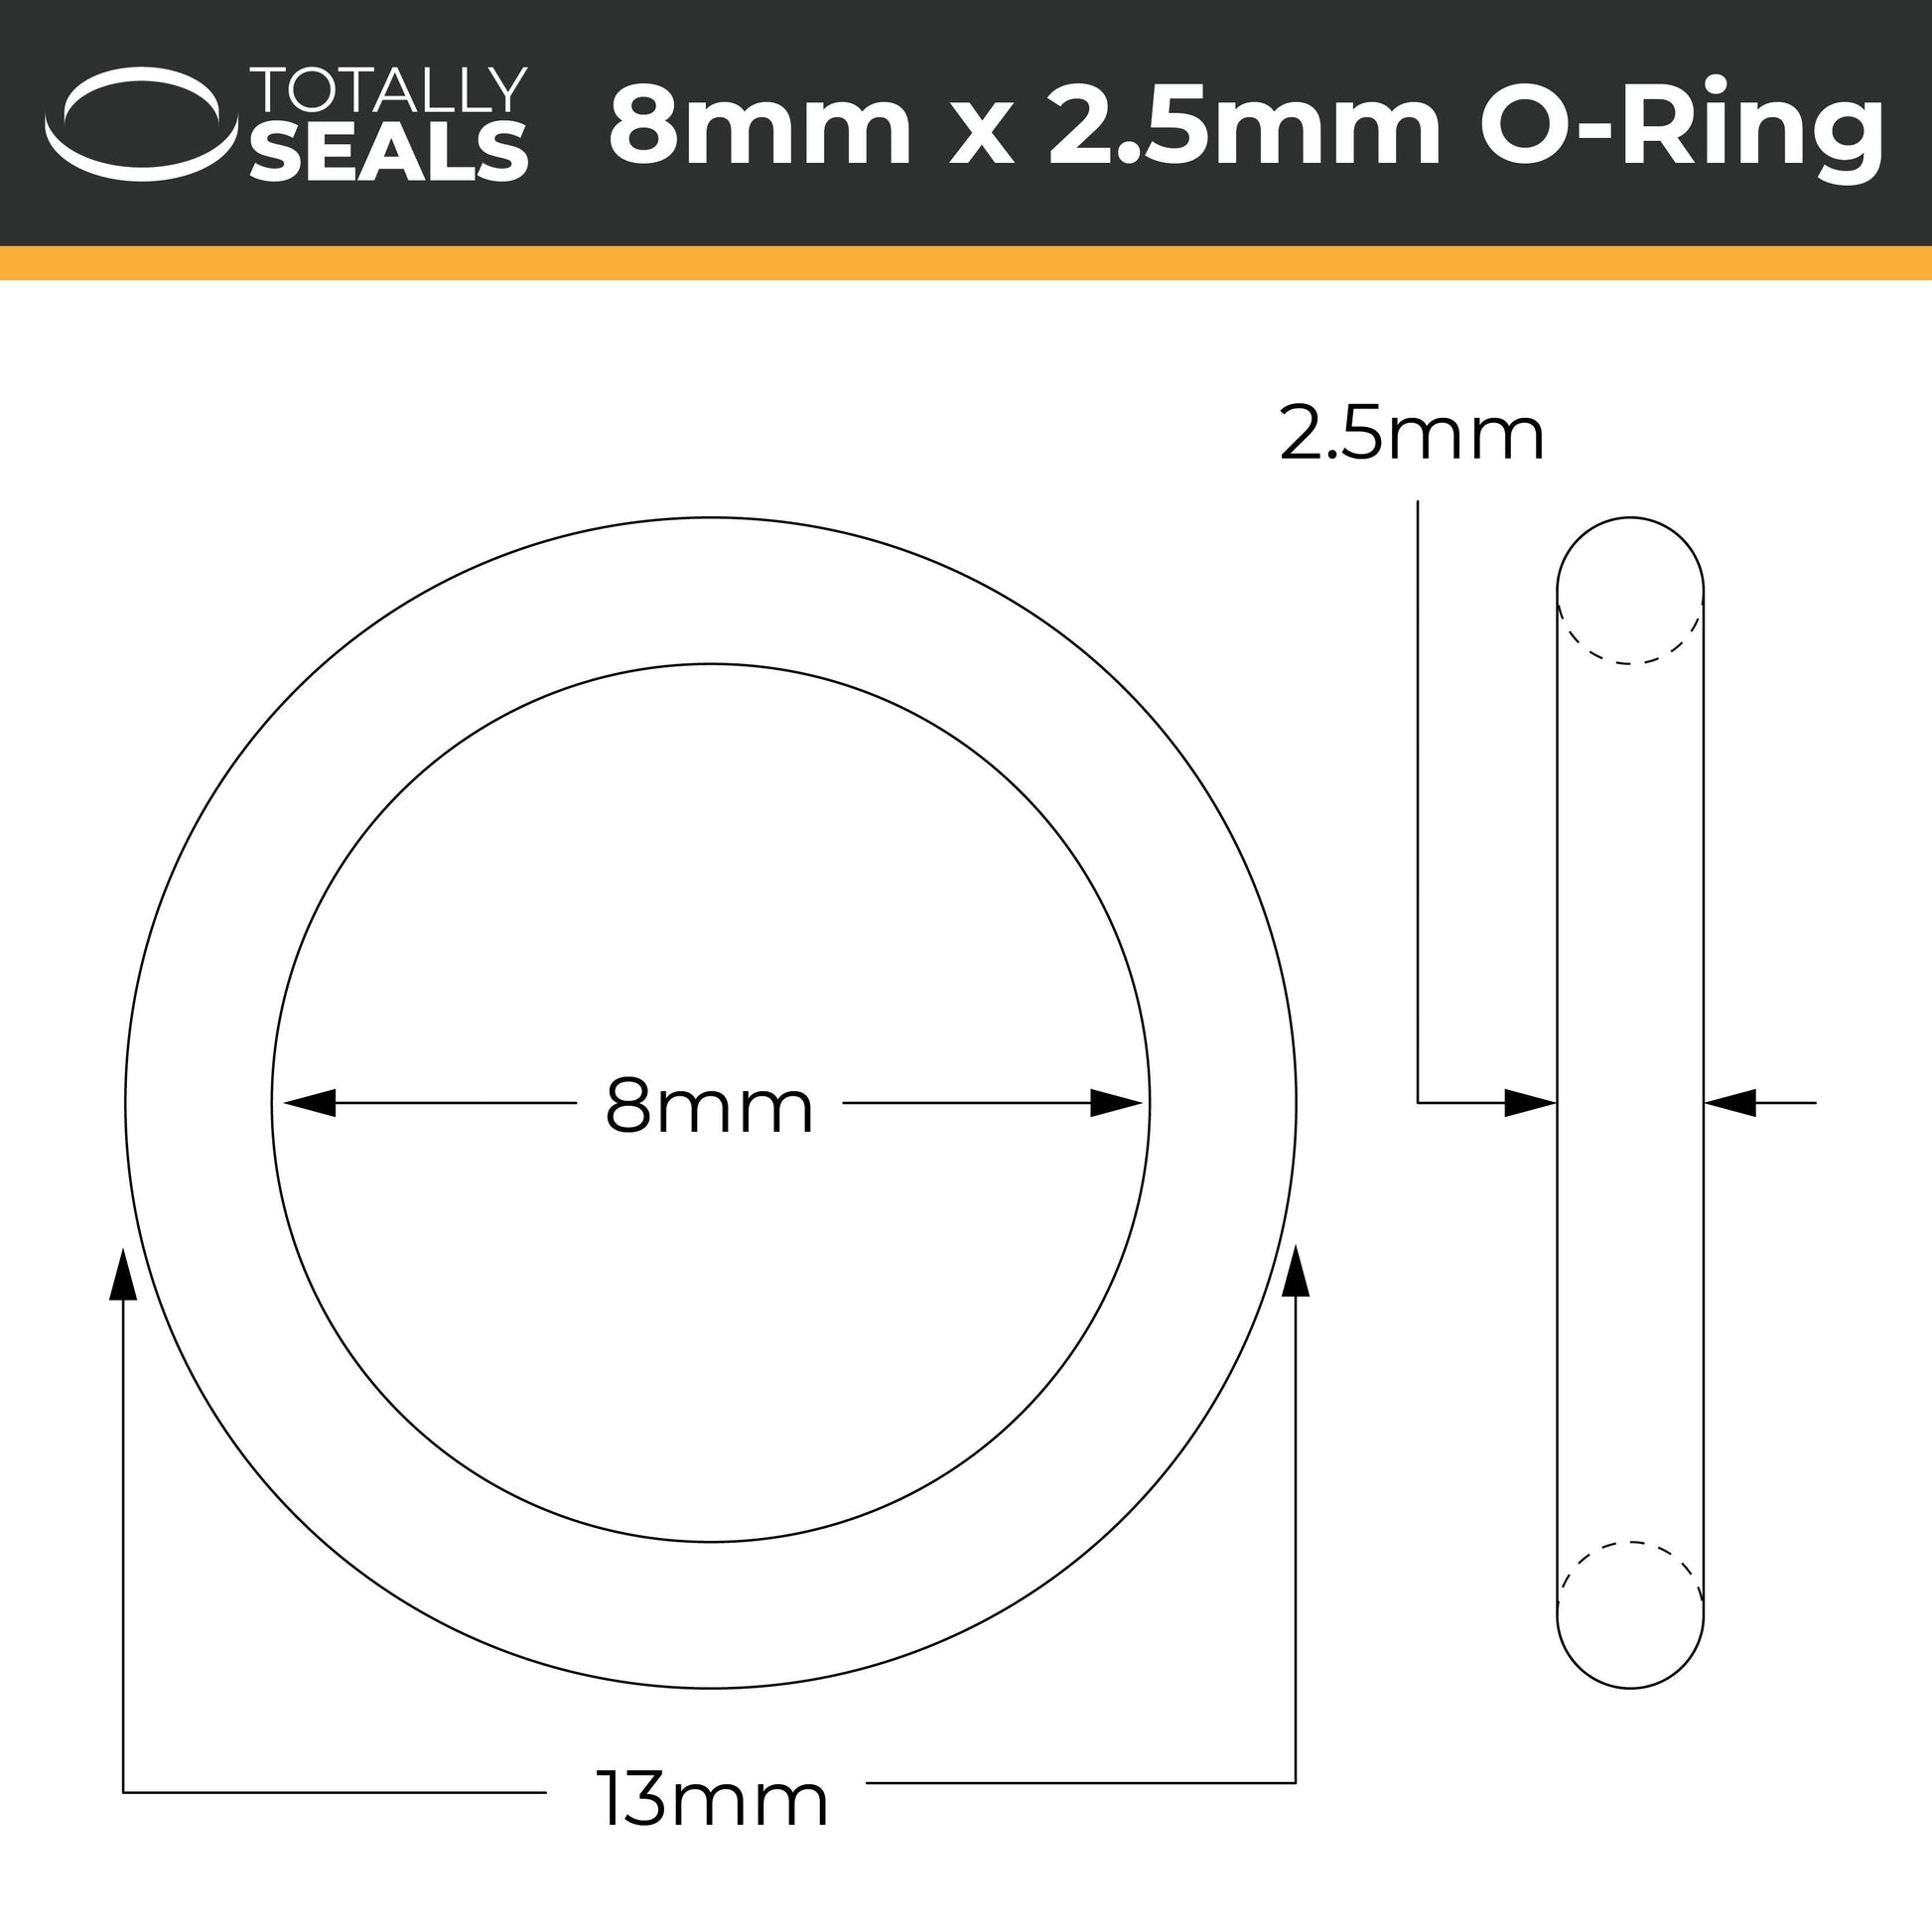 8mm x 2.5mm (13mm OD) Nitrile O-Rings - Totally Seals®